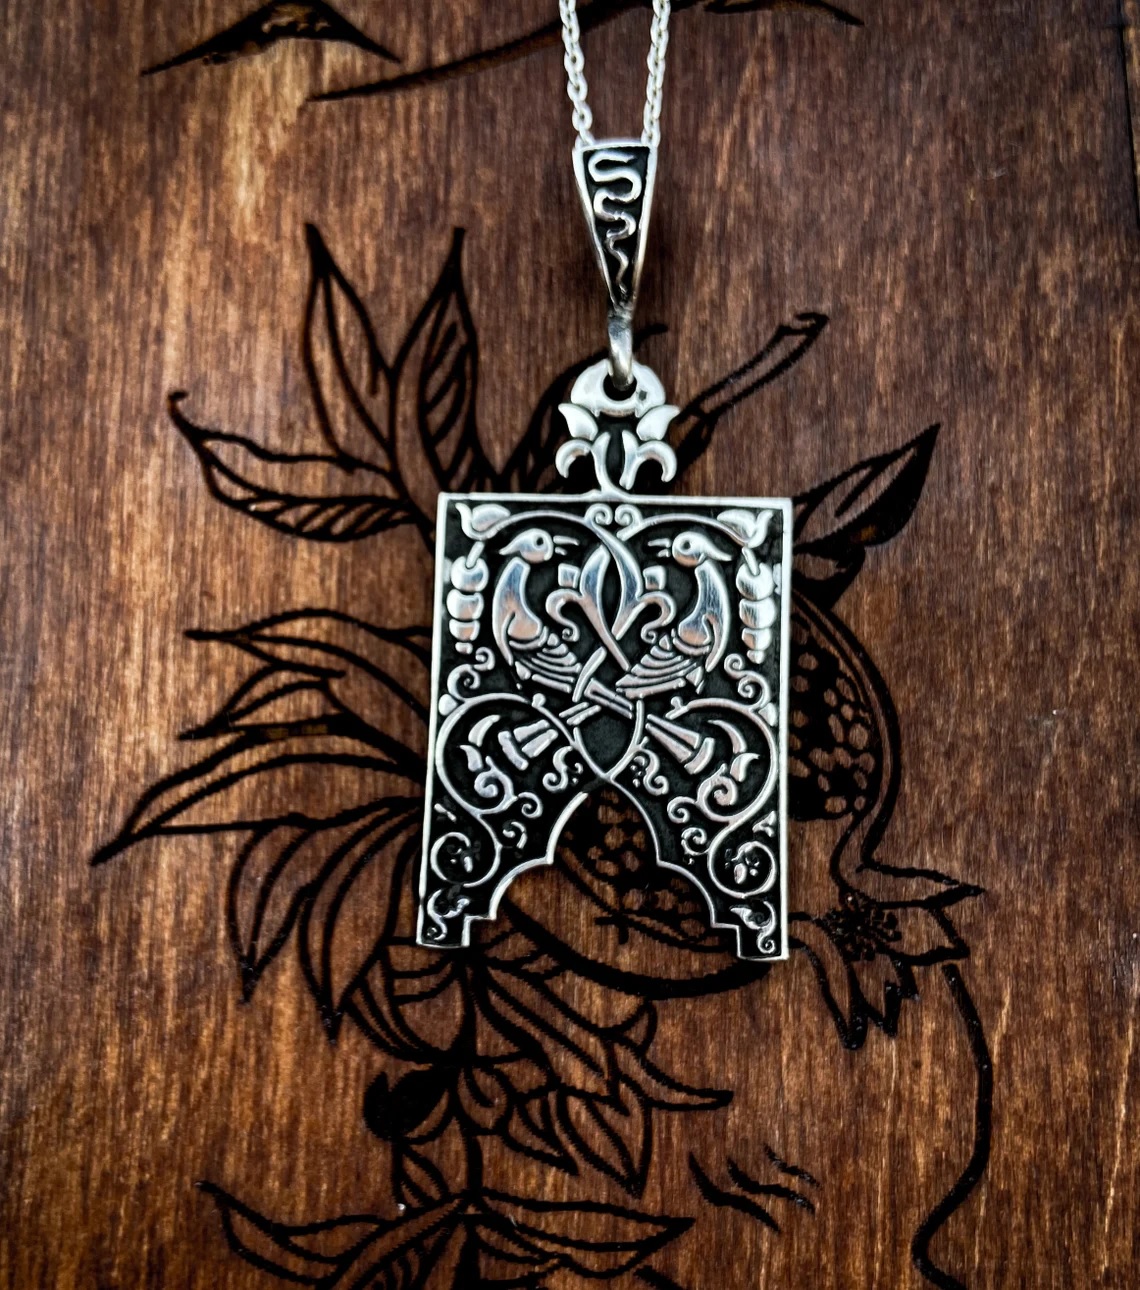 Armenian Ornament Large Pendant Sterling Silver 925, Silver chain as a gift. Armenian Handmade Jewelry, Gift for Her